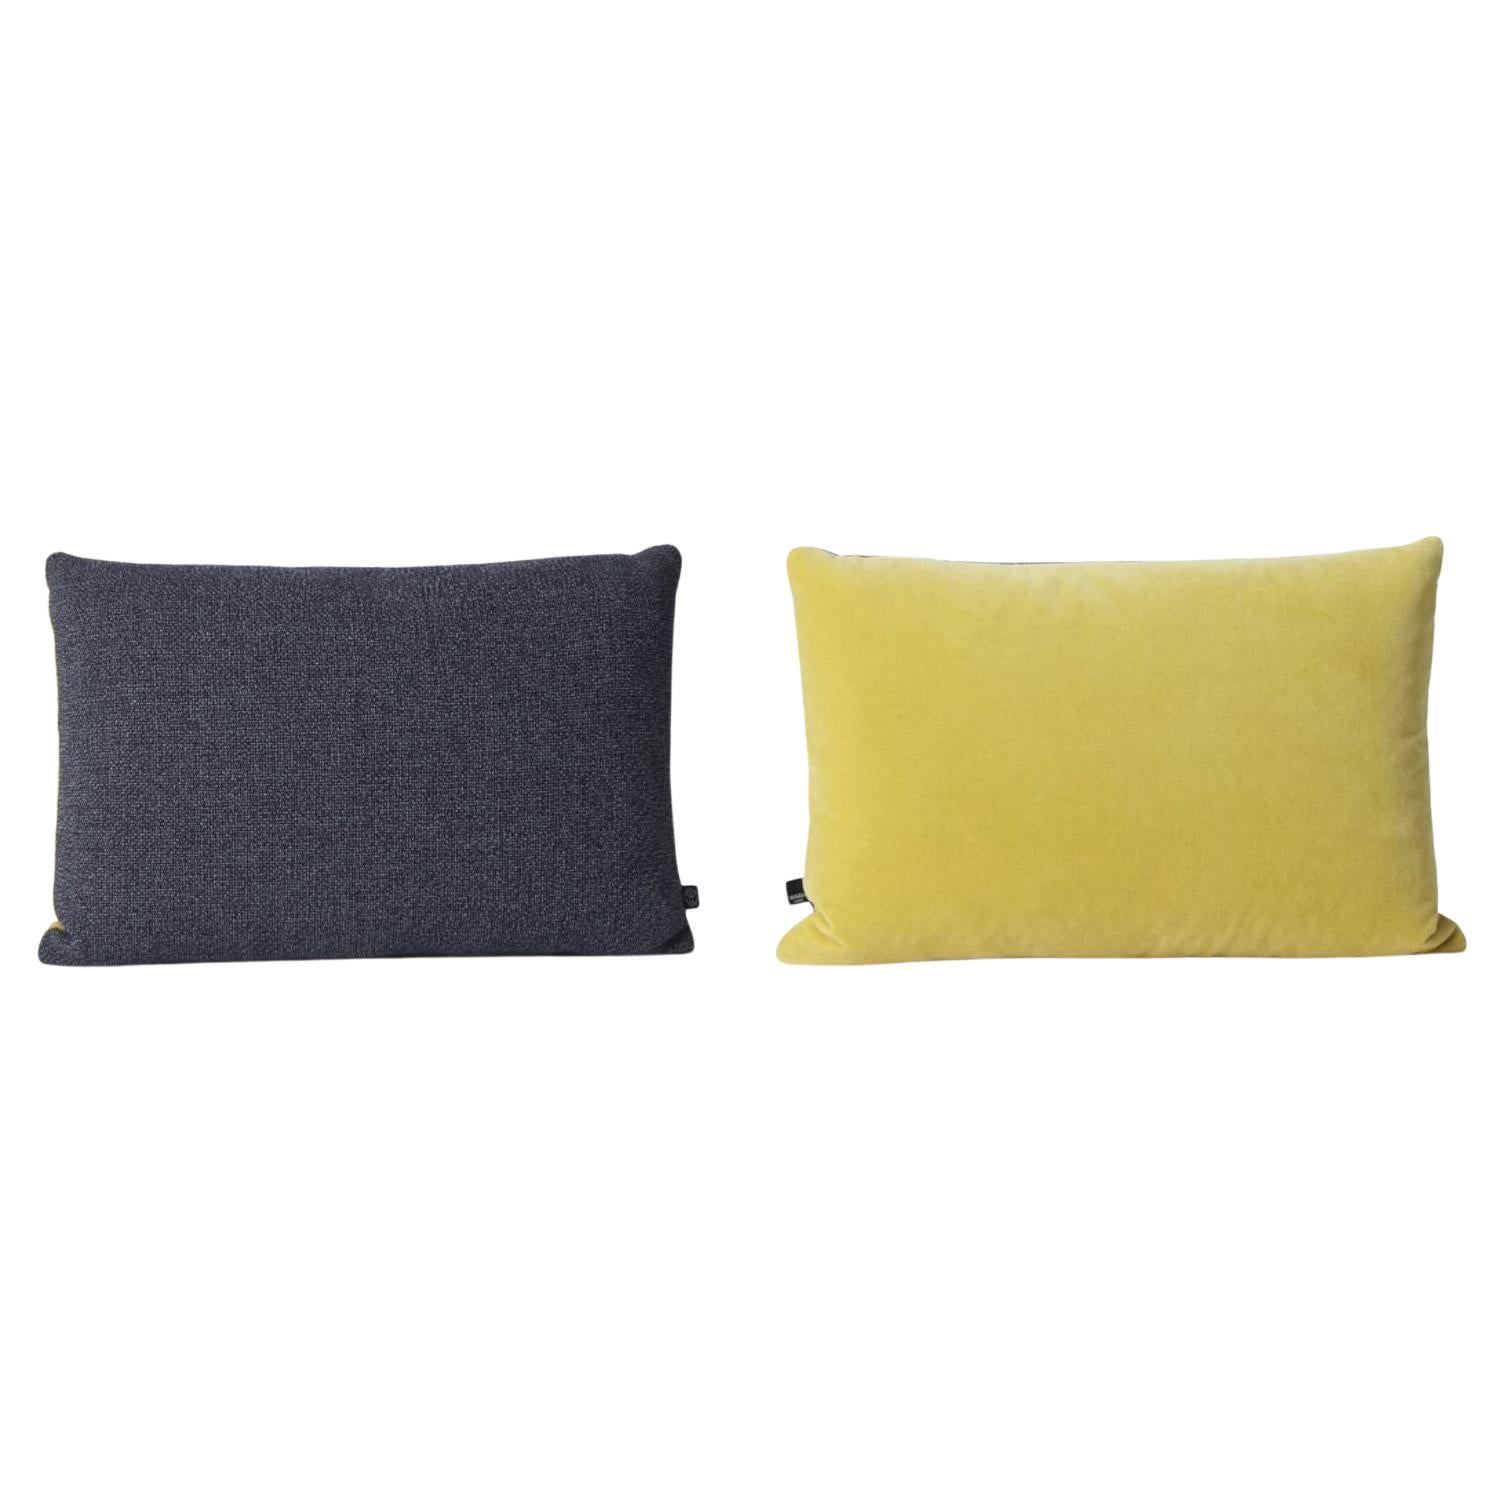 Set of 2 Rectangular Cushions by Warm Nordic For Sale